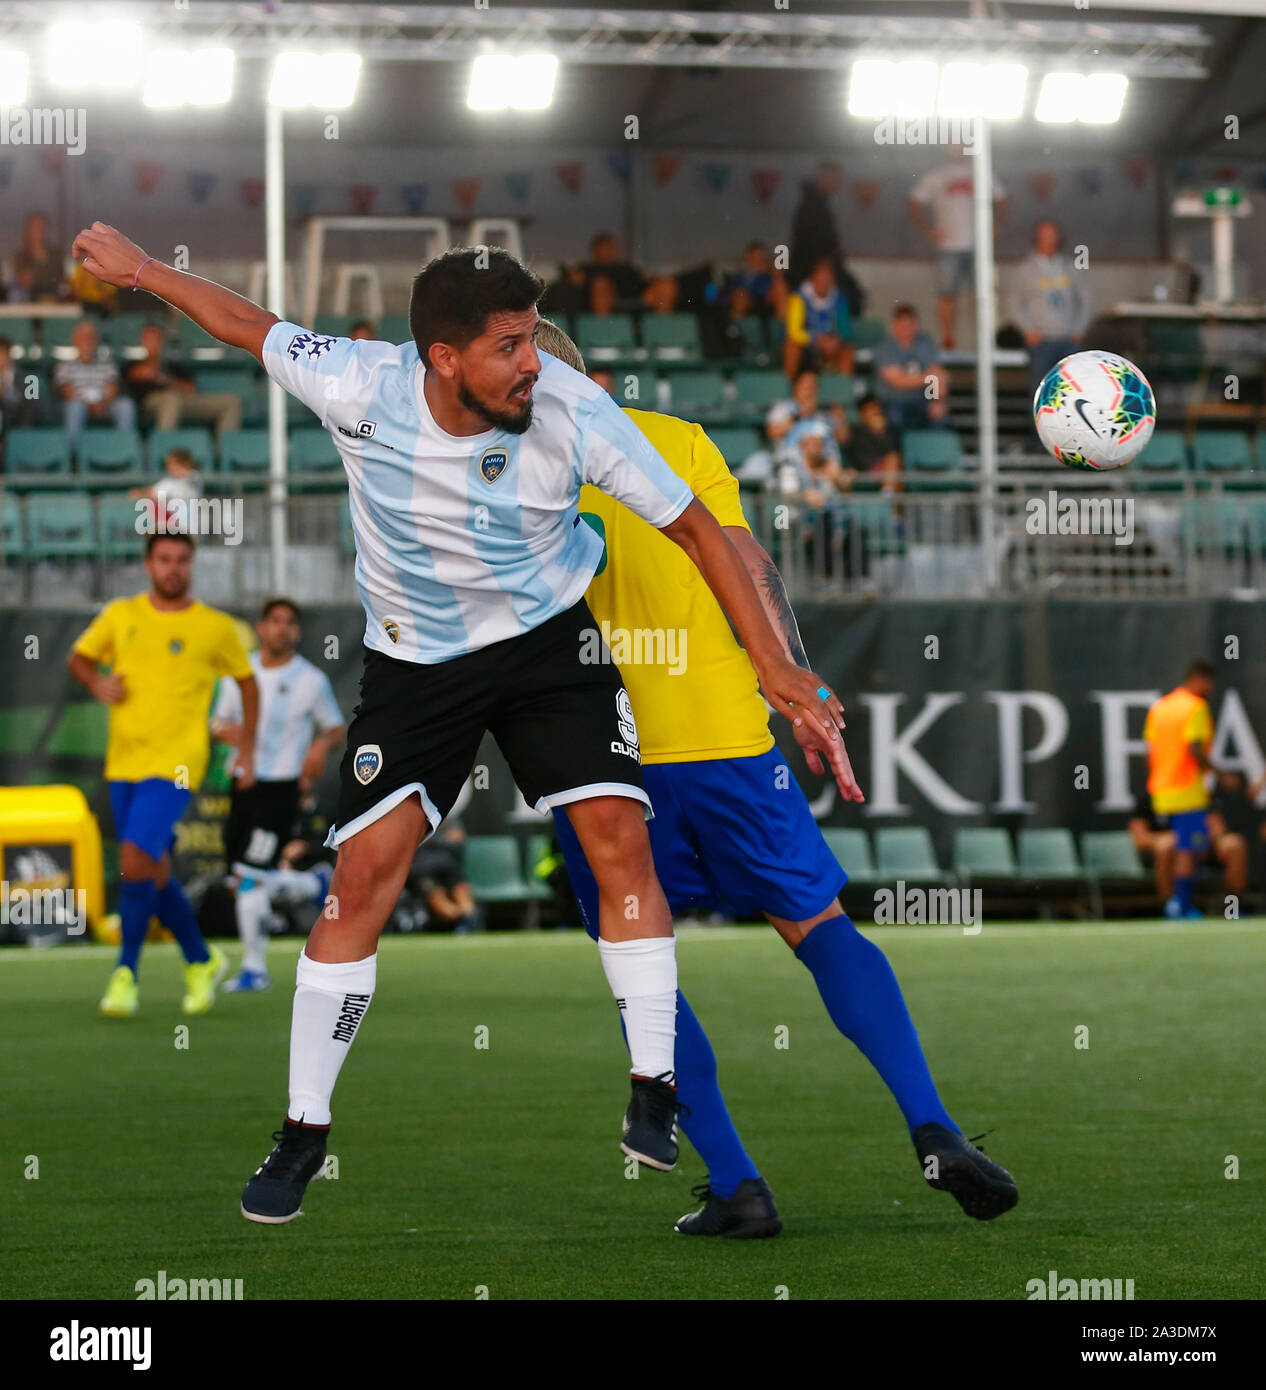 7th October 2019; Langley Park, Perth, Western Australia, Australia; World Mini Football Federation World Cup; Brazil versus Argentina, Julio Federico Tabera Saravia of Argentina wins the header against Thiago Conclaves of Brazil - Editorial Use Stock Photo